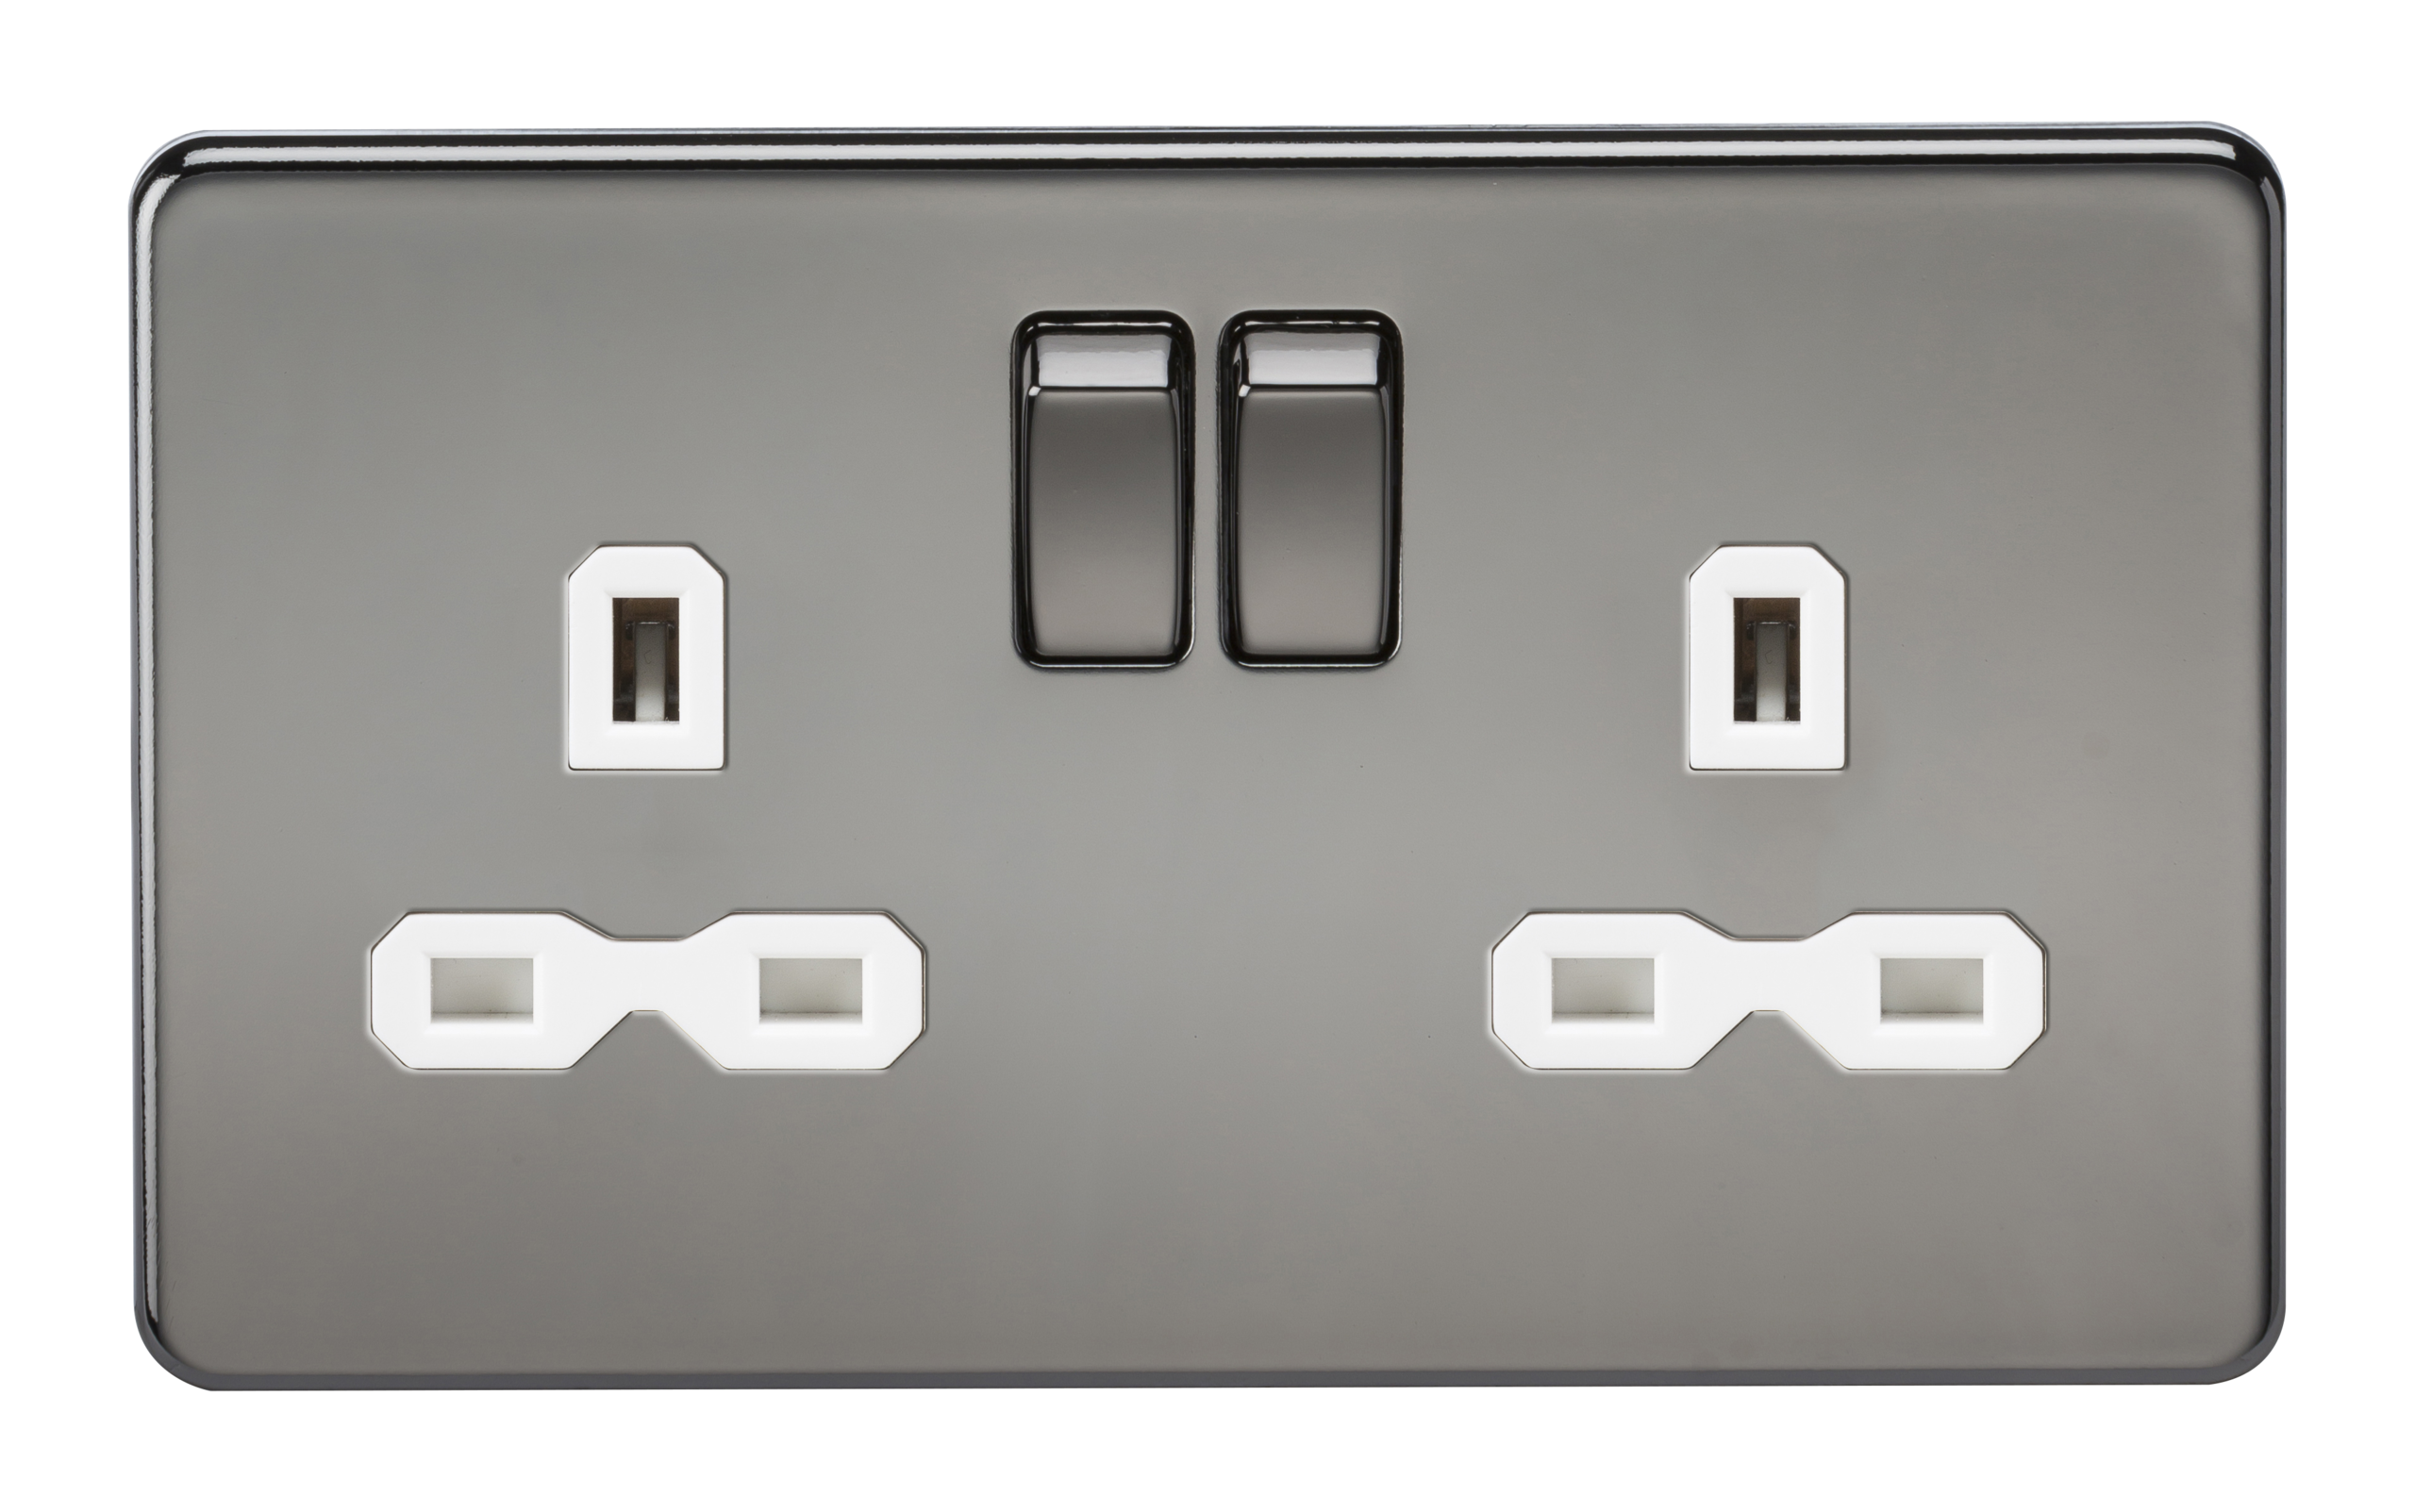 Screwless 13A 2G DP Switched Socket - Black Nickel With White Insert - SFR9000BNW 